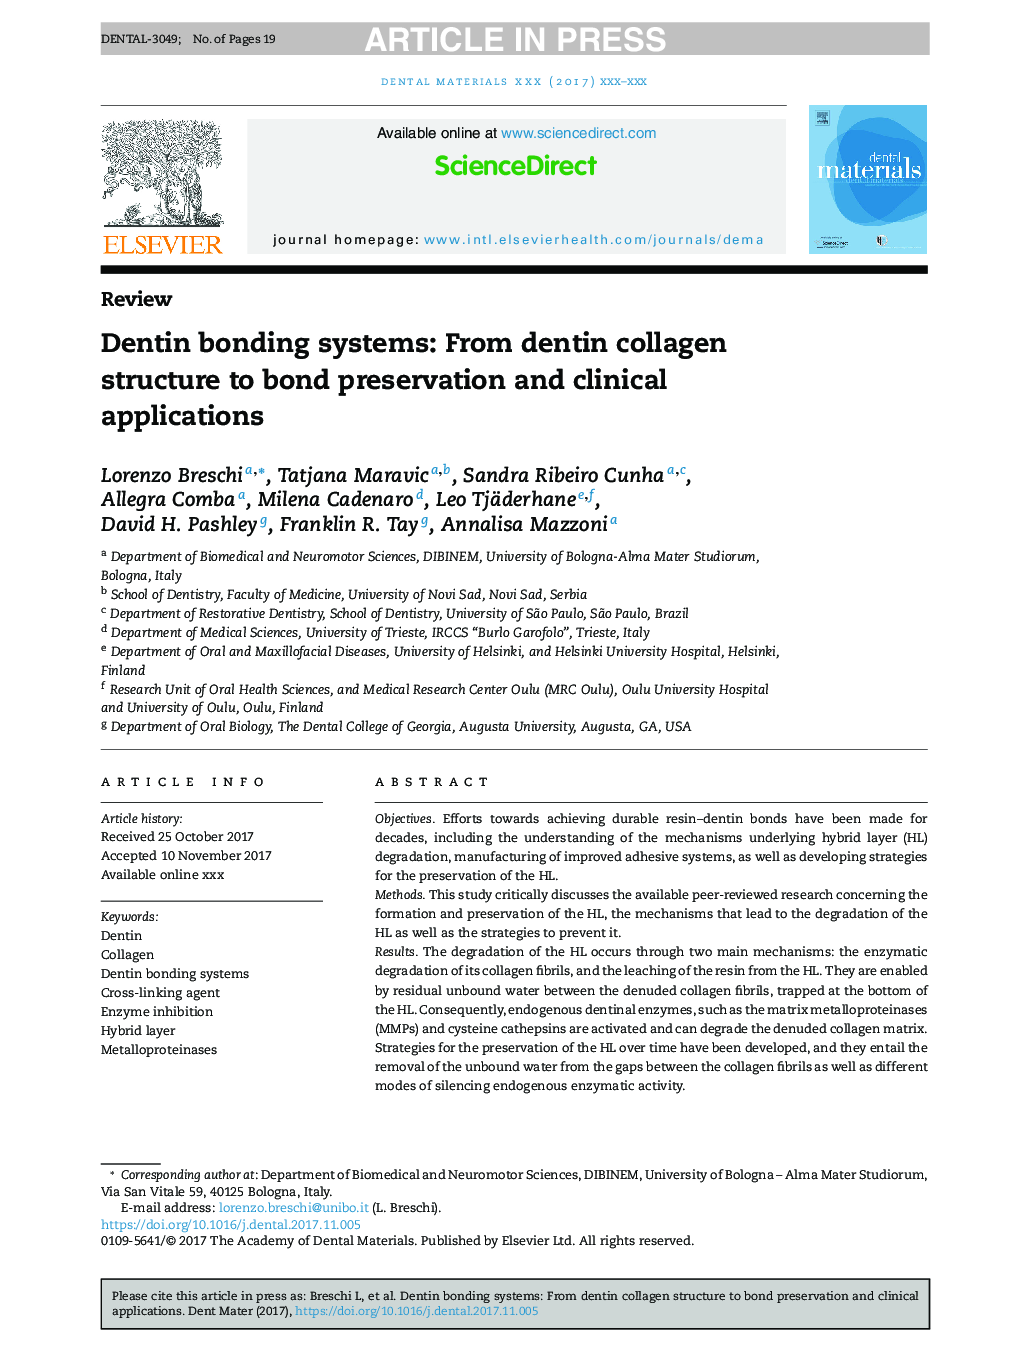 Dentin bonding systems: From dentin collagen structure to bond preservation and clinical applications